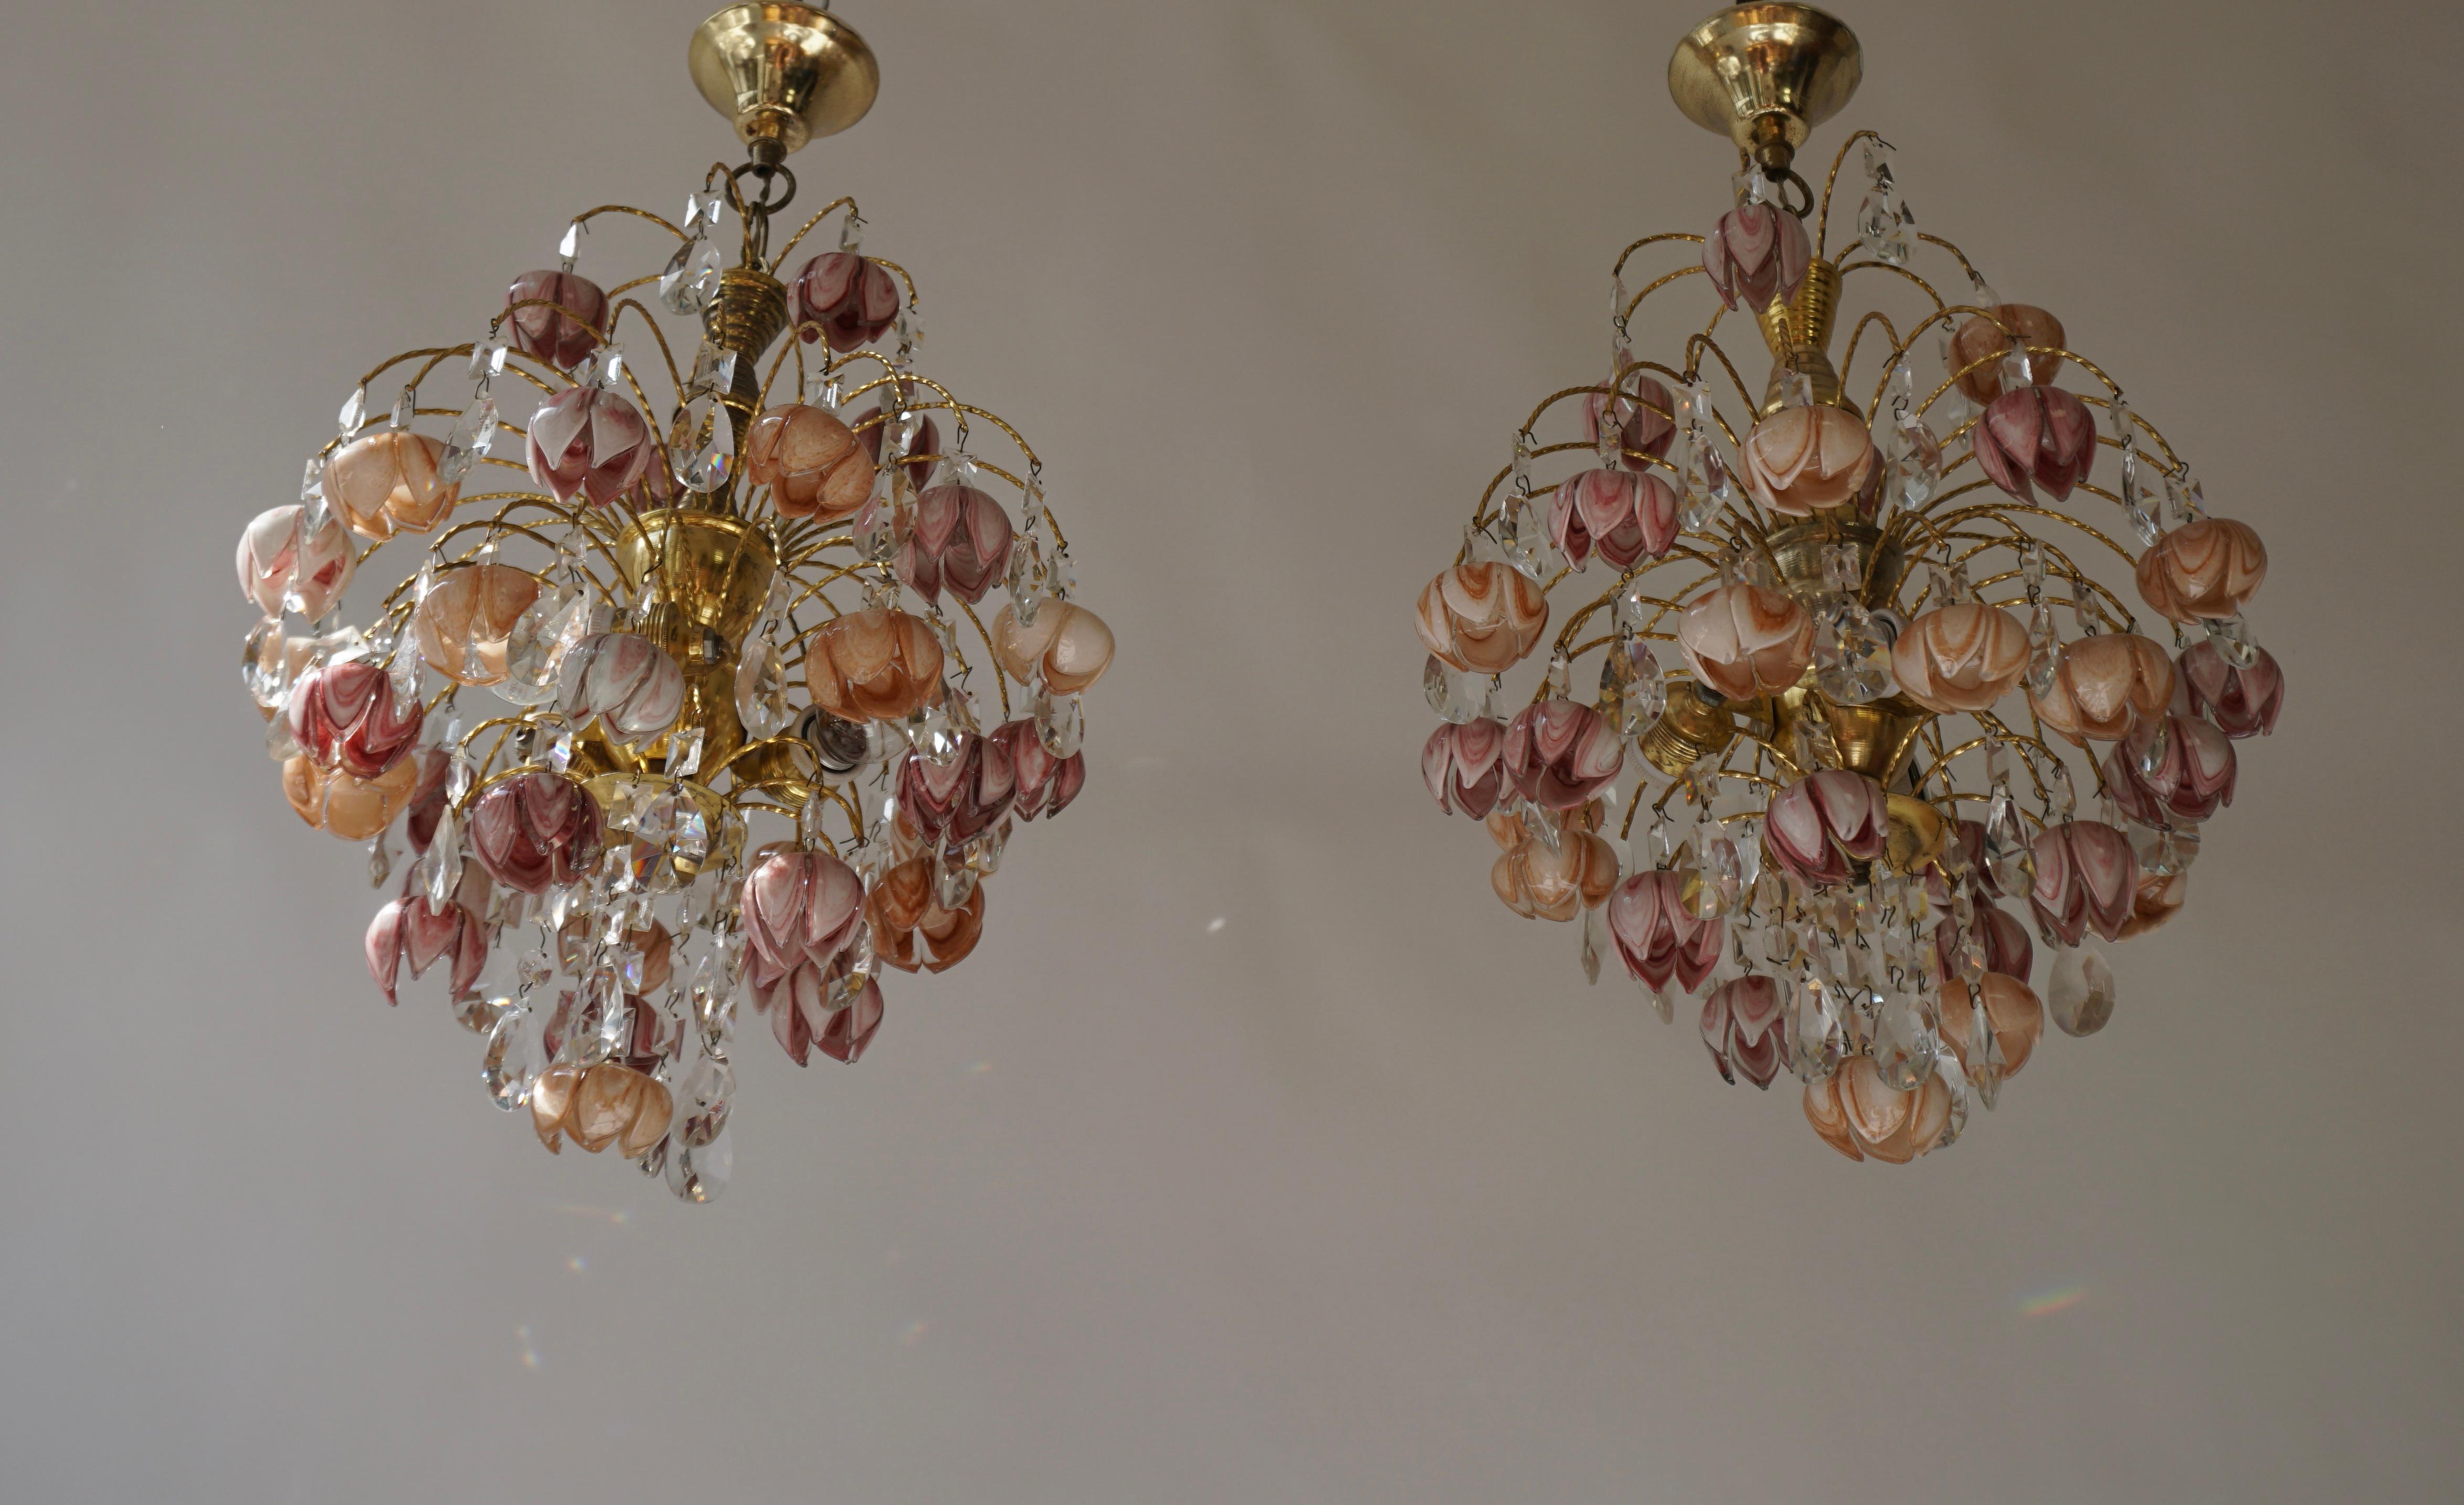 Pair of Murano Glass Floral Chandeliers, Italy, 1970s For Sale 1